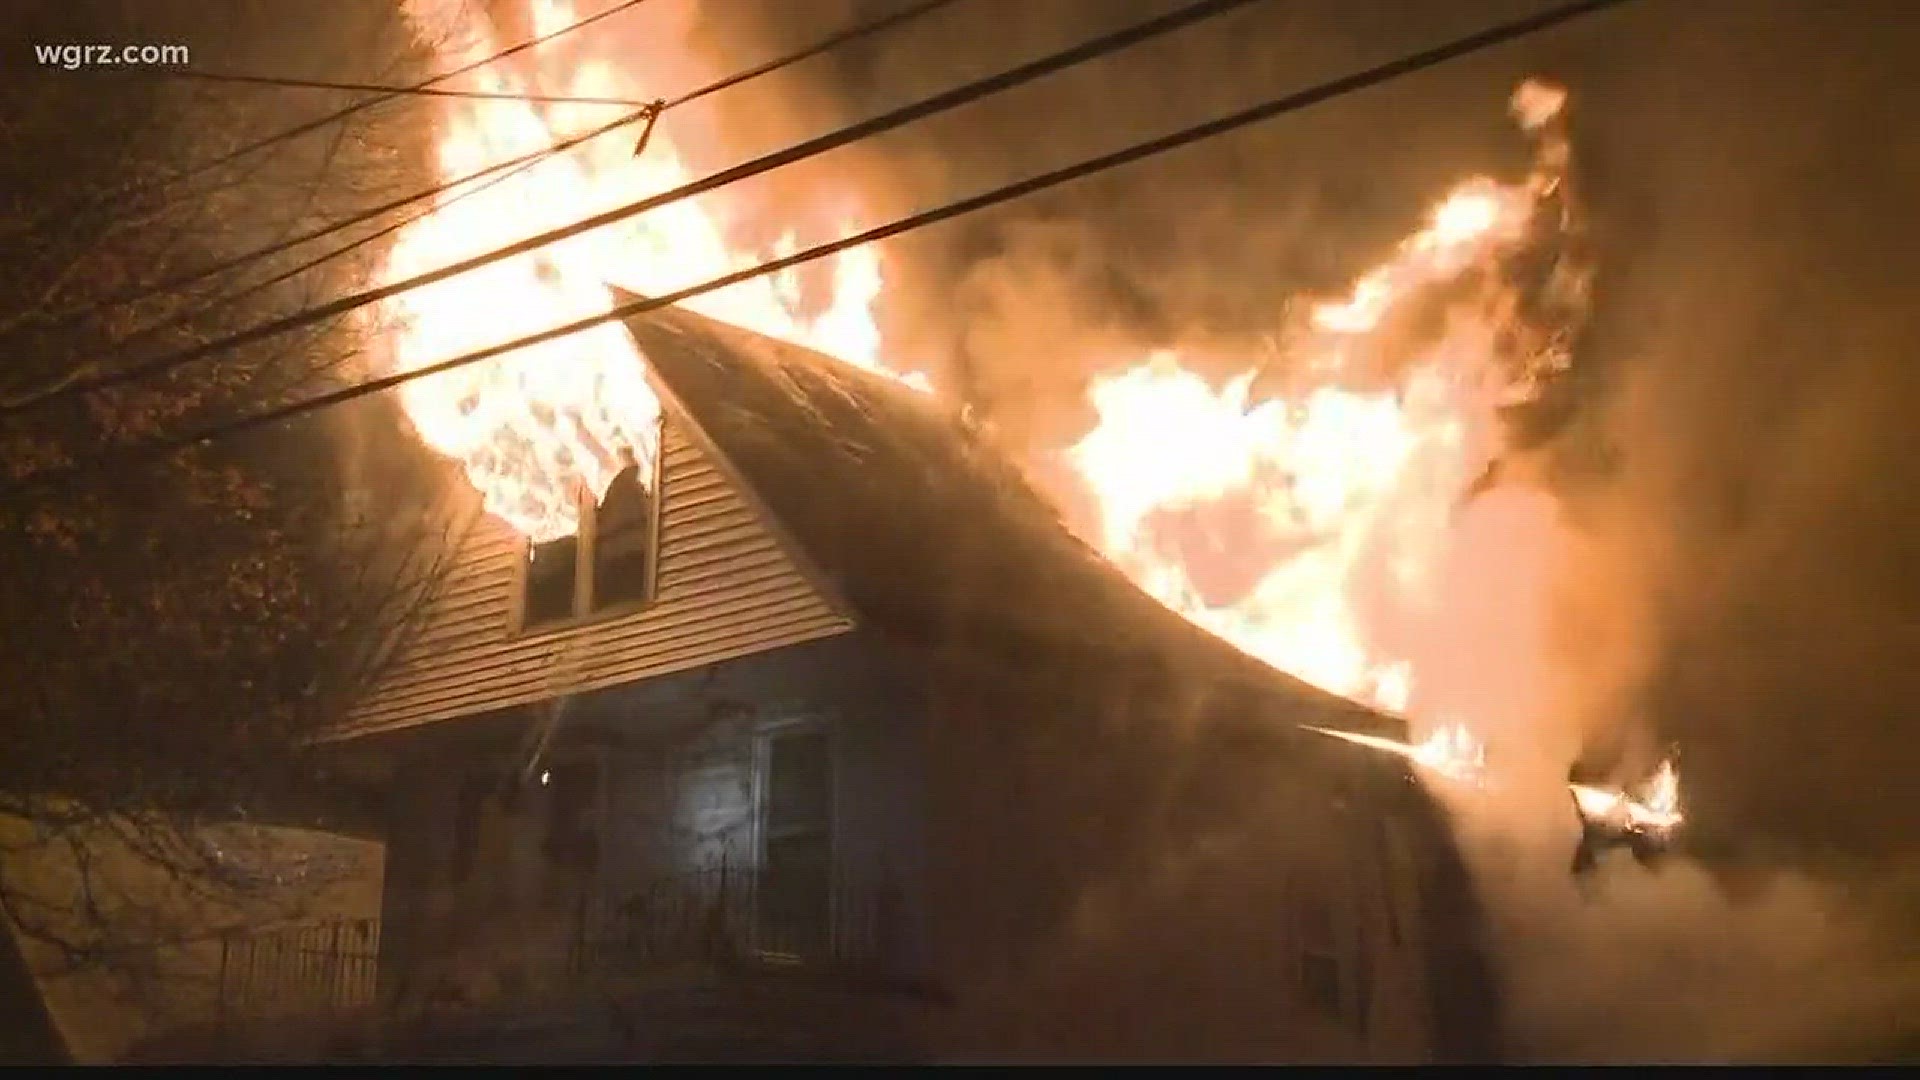 A 6-year-old has been killed in a house fire in Buffalo's Lovejoy neighborhood.